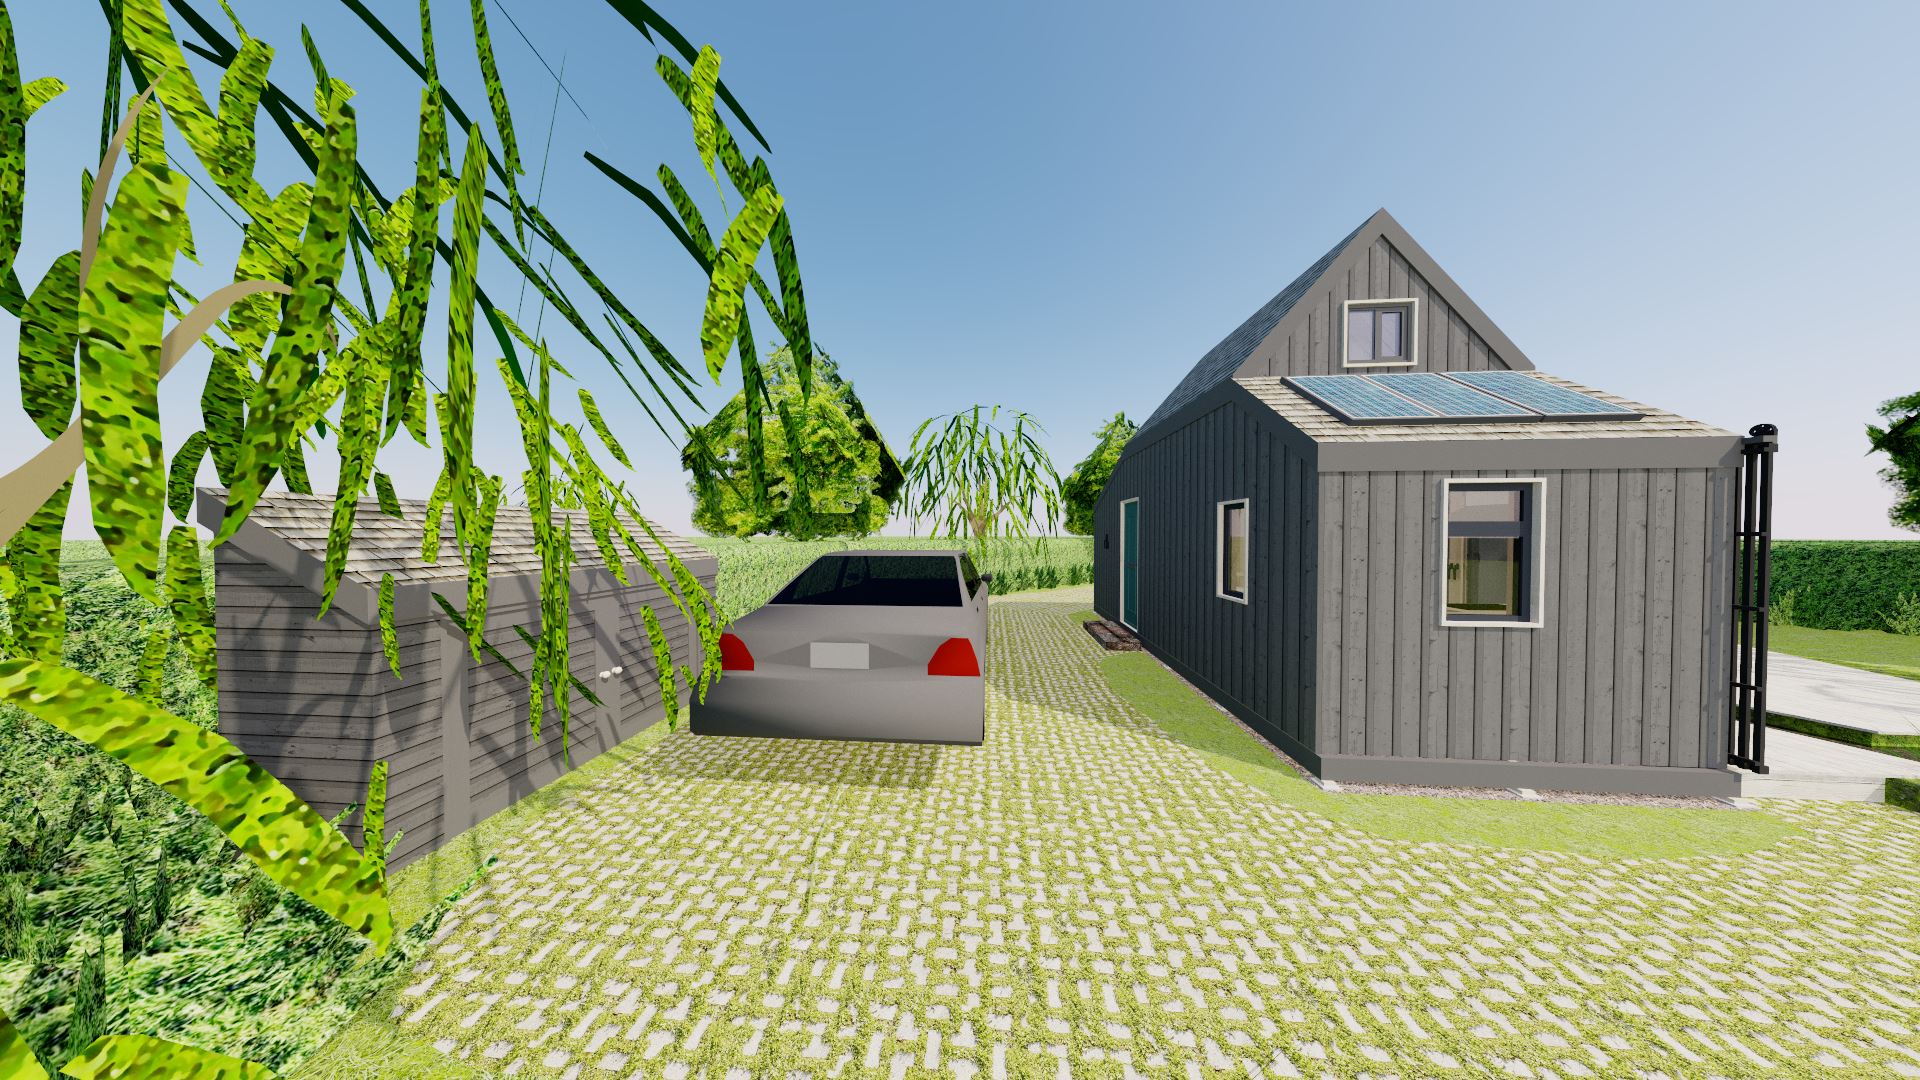 The low-key parking also provides a subtle path to the rear of the property; where a small standalone bike shed can be seen next to the electric car.